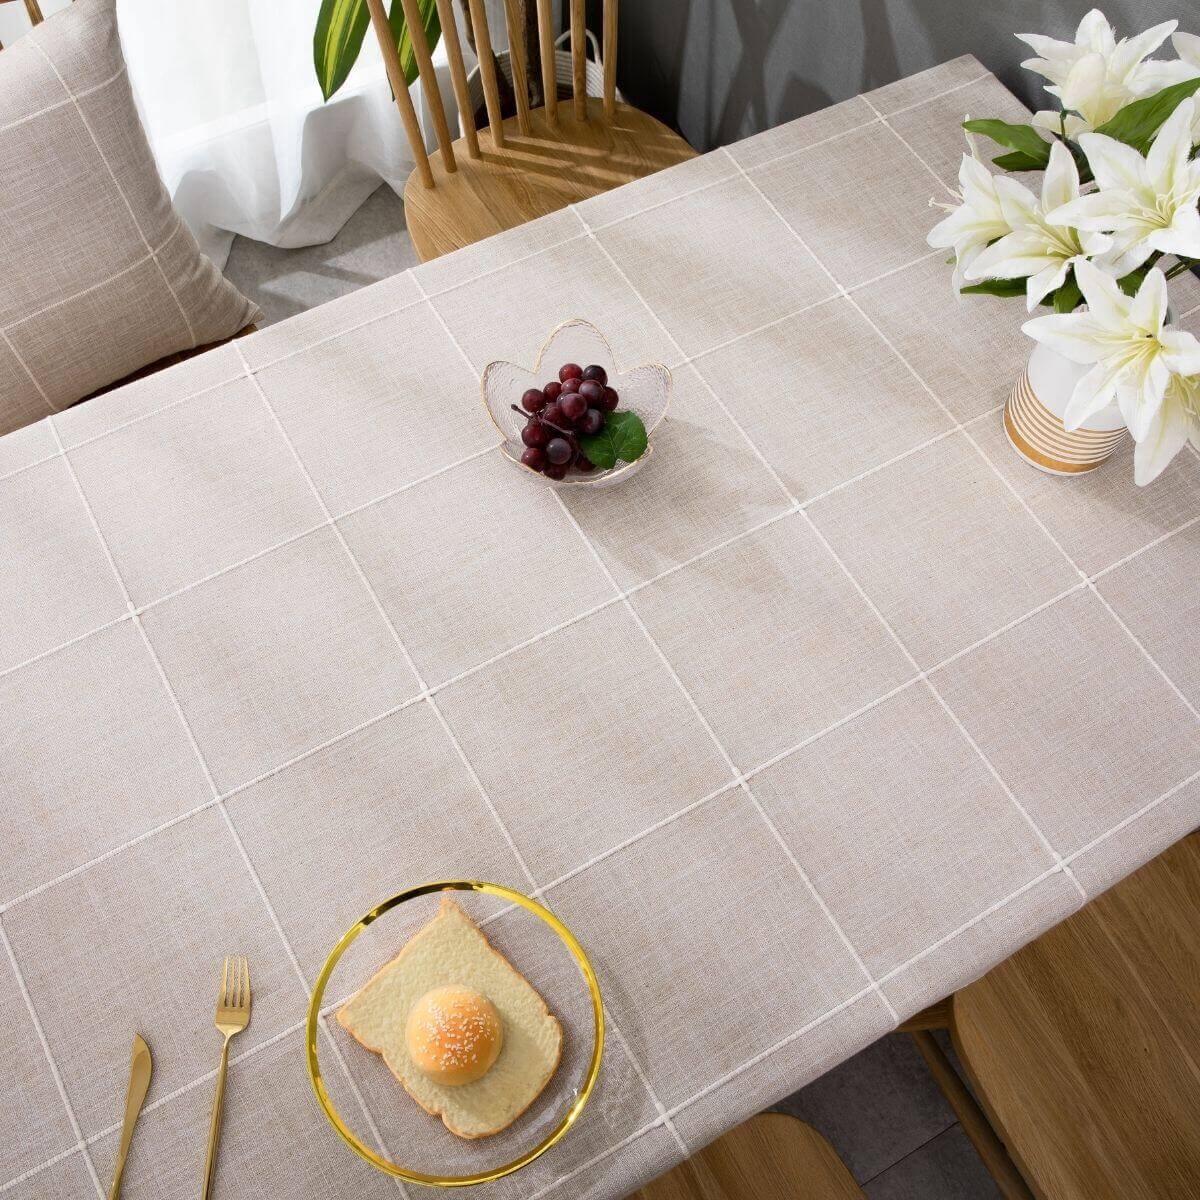 SASTYBALE beige rectangle tablecloth